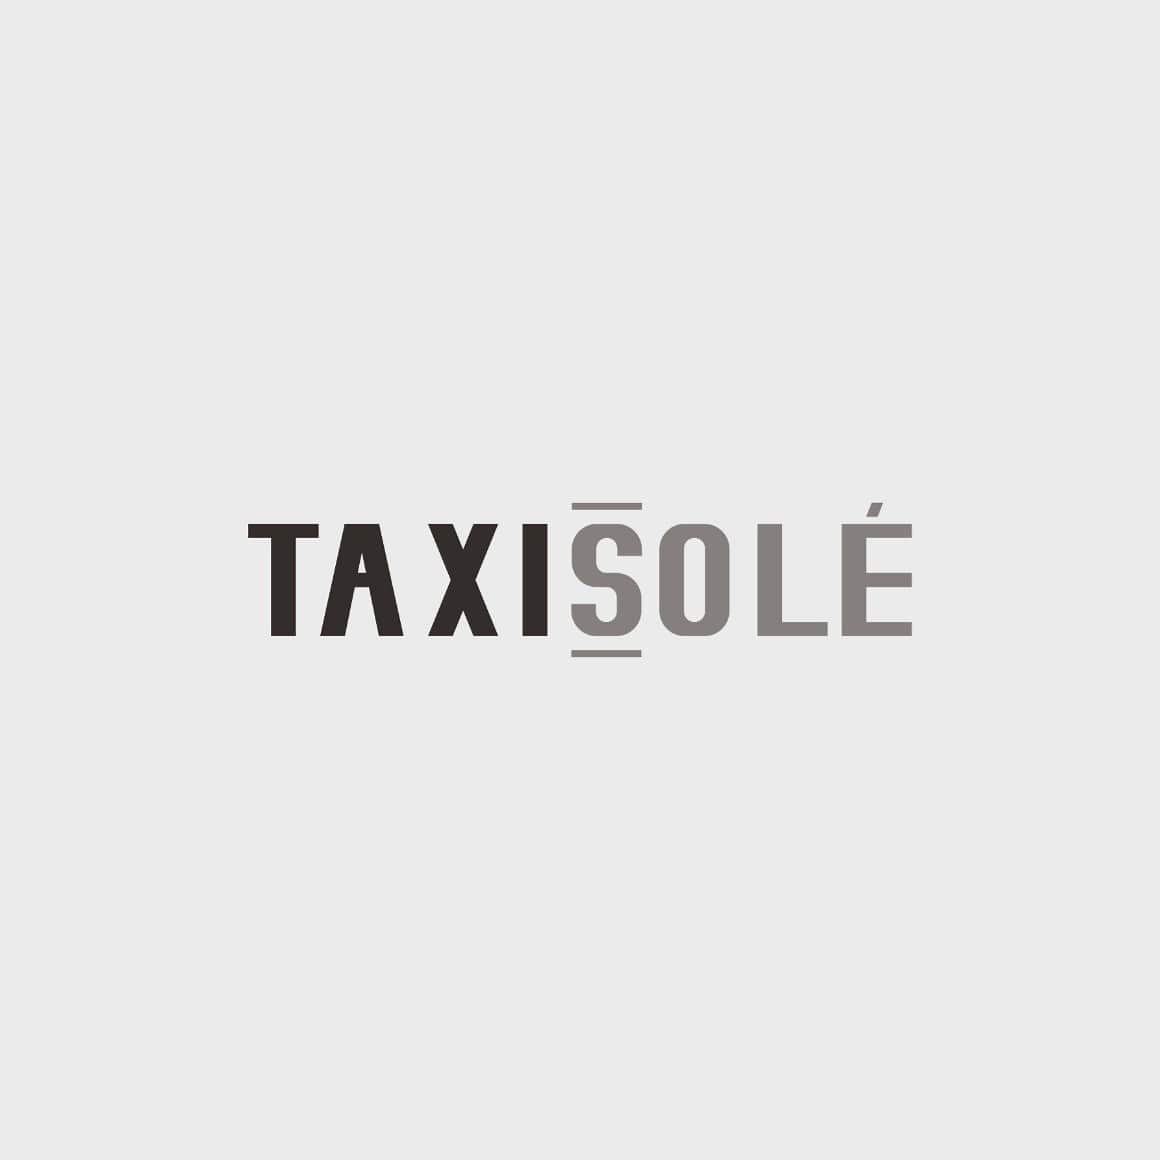 TAXI SOLE